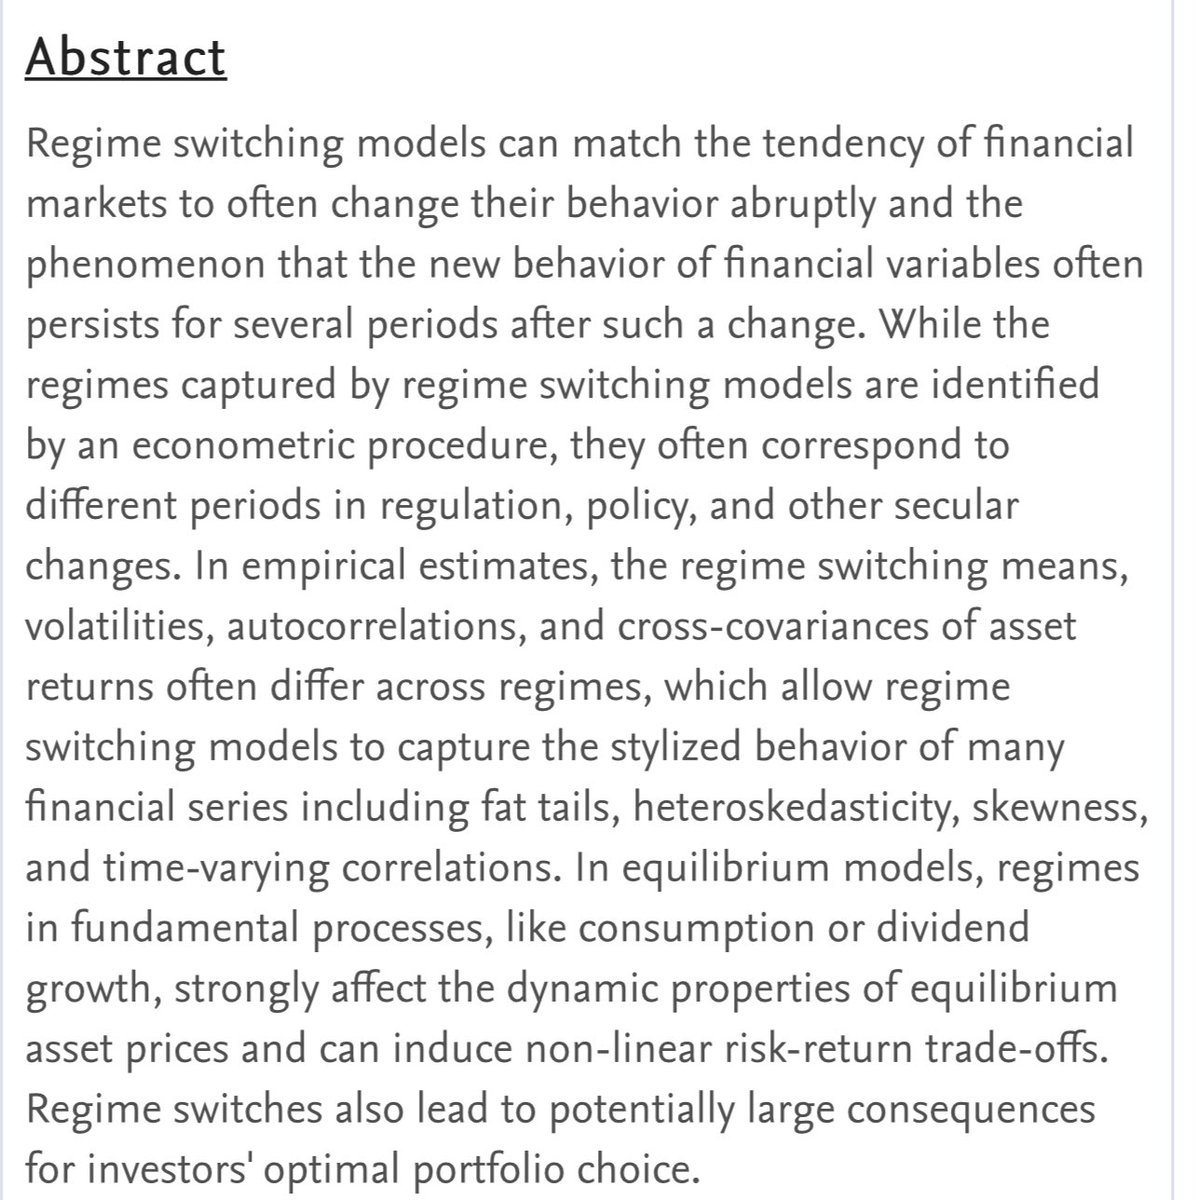 Regime Changes and Financial Markets (2011)  https://papers.ssrn.com/sol3/papers.cfm?abstract_id=1890003